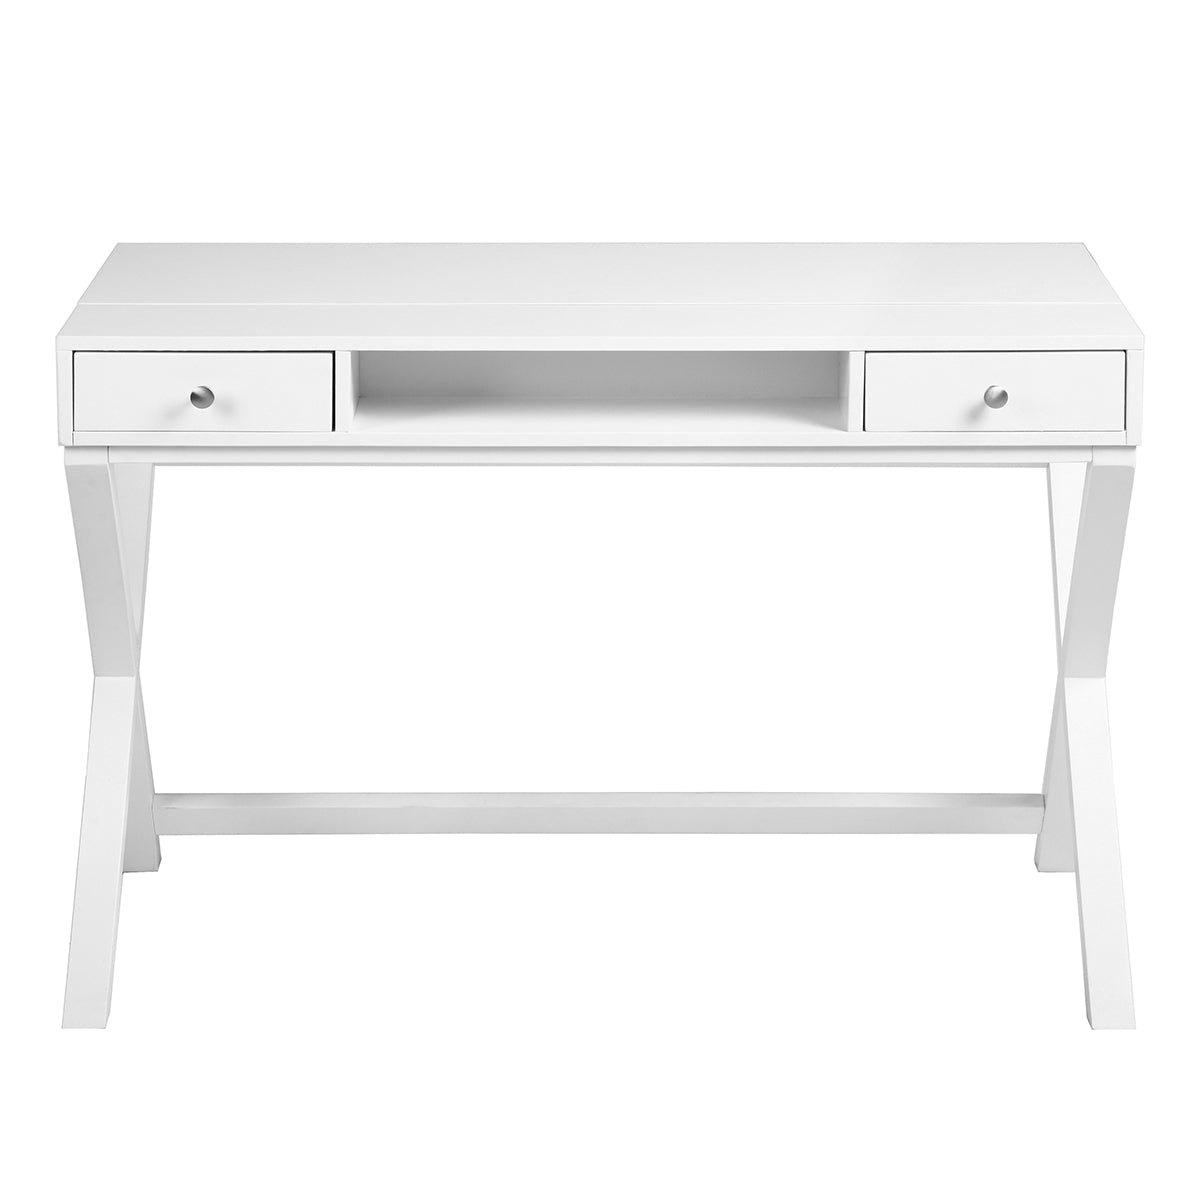 Lift Desk with 2 Drawer Storage, Computer Desk with Lift Table Top, Adjustable Height Table for Home Office, Living Room,white